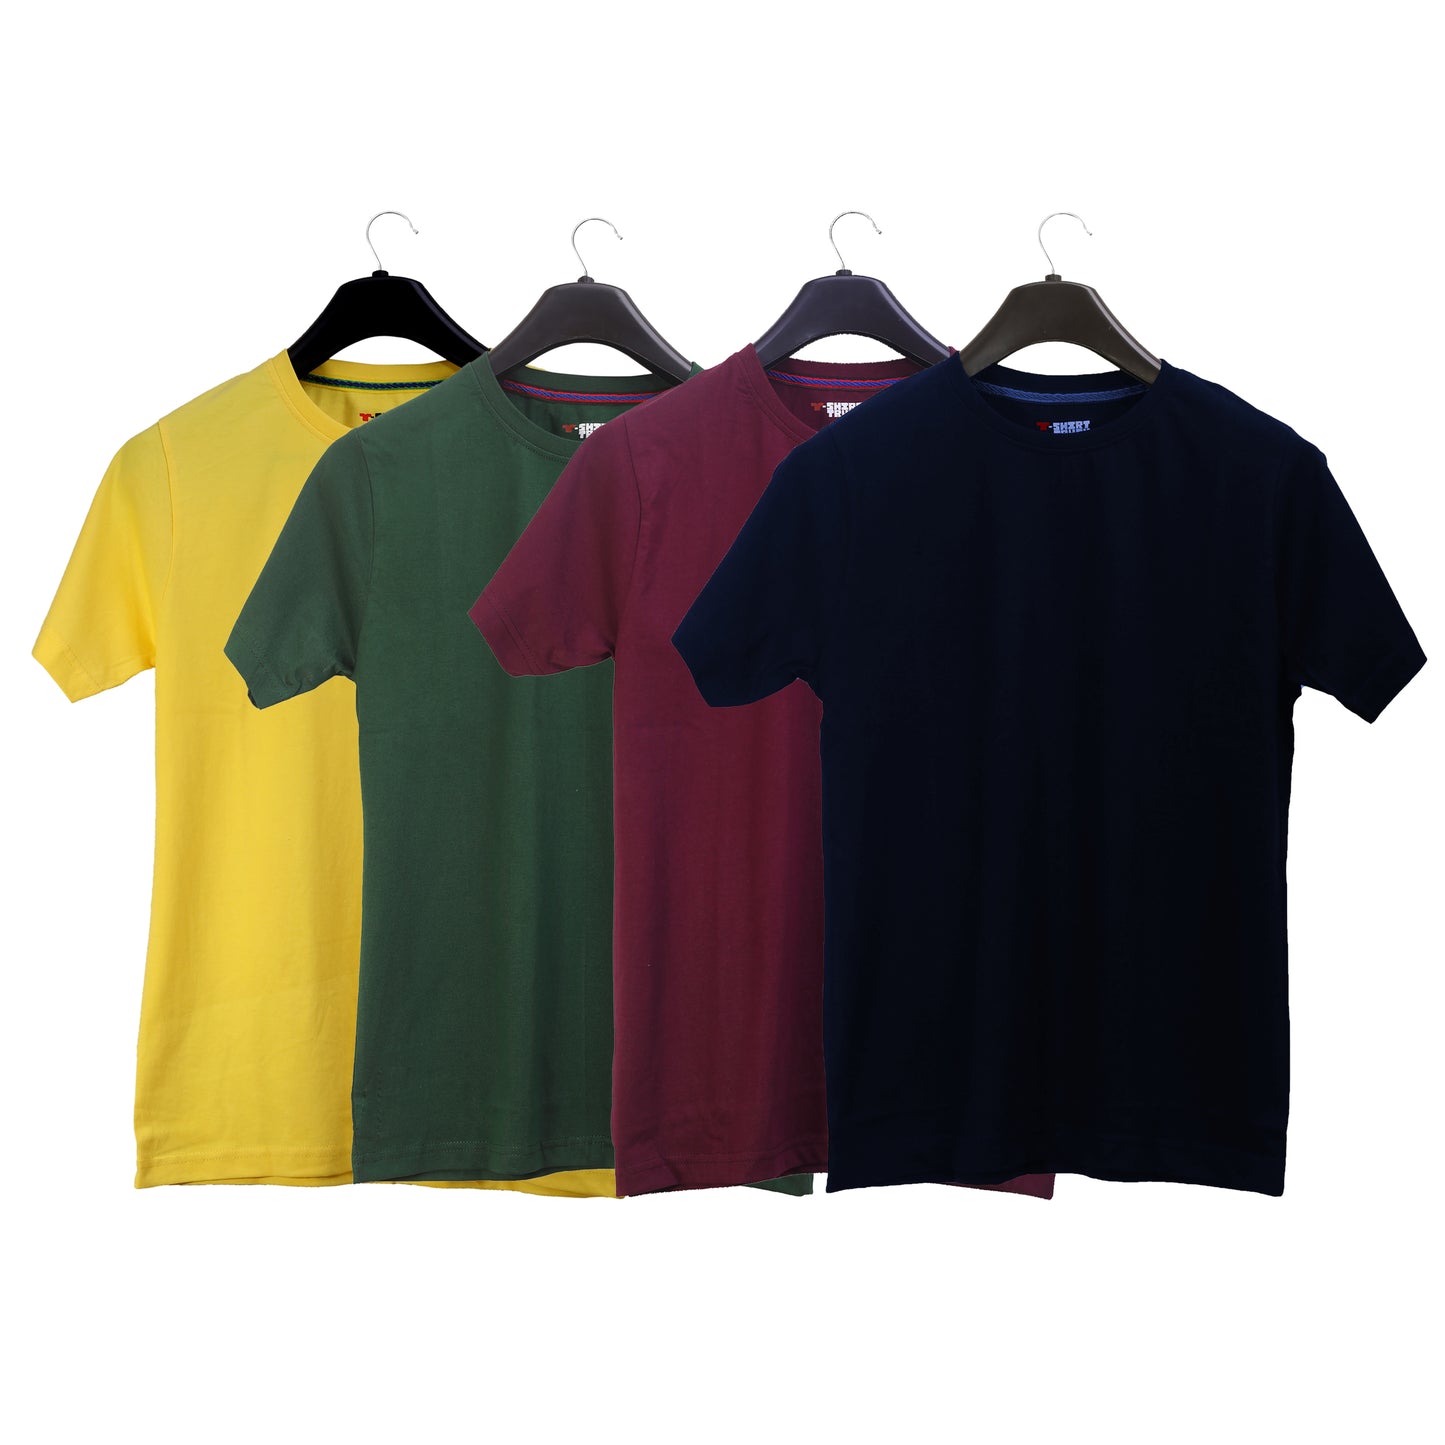 Unisex Round Neck Plain Solid Combo Pack of 4 T-shirts Yellow, Green, Blue & Maroon